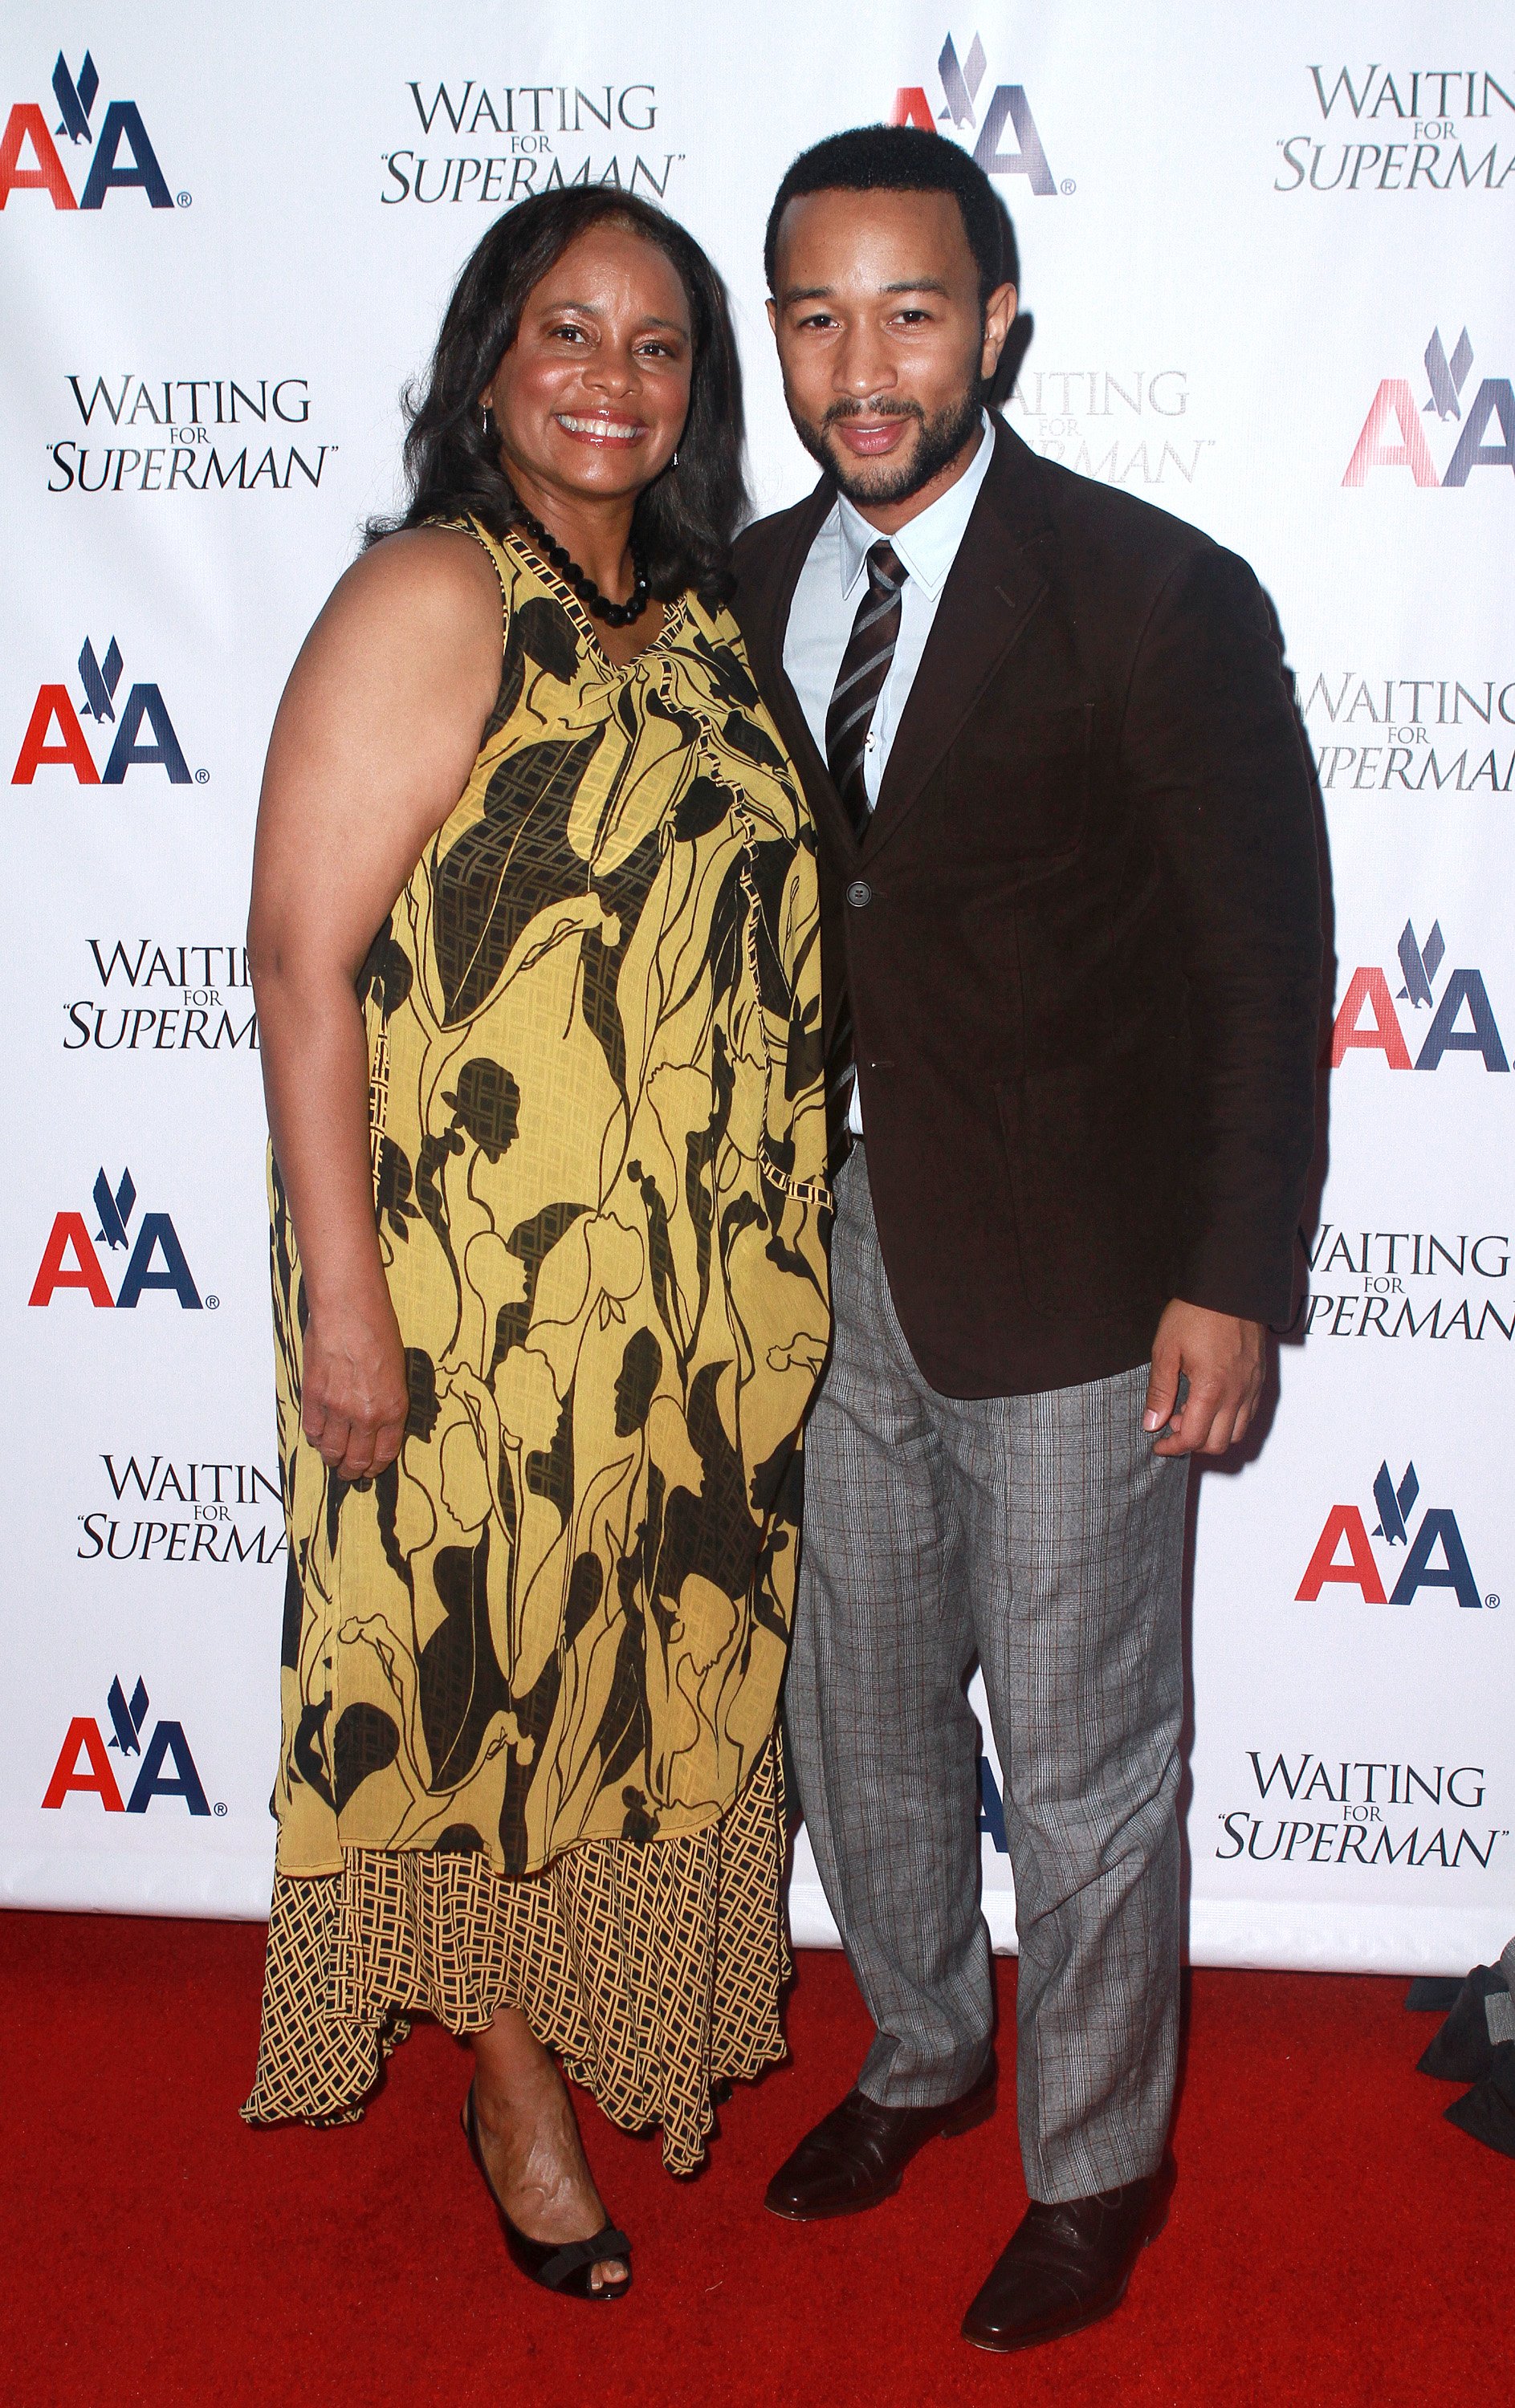 Phyllis Elaine Stephens and John Legend photographed at the 2010 "Waiting For 'Superman'" premiere at Alice Tully Hall | Source: Getty Images